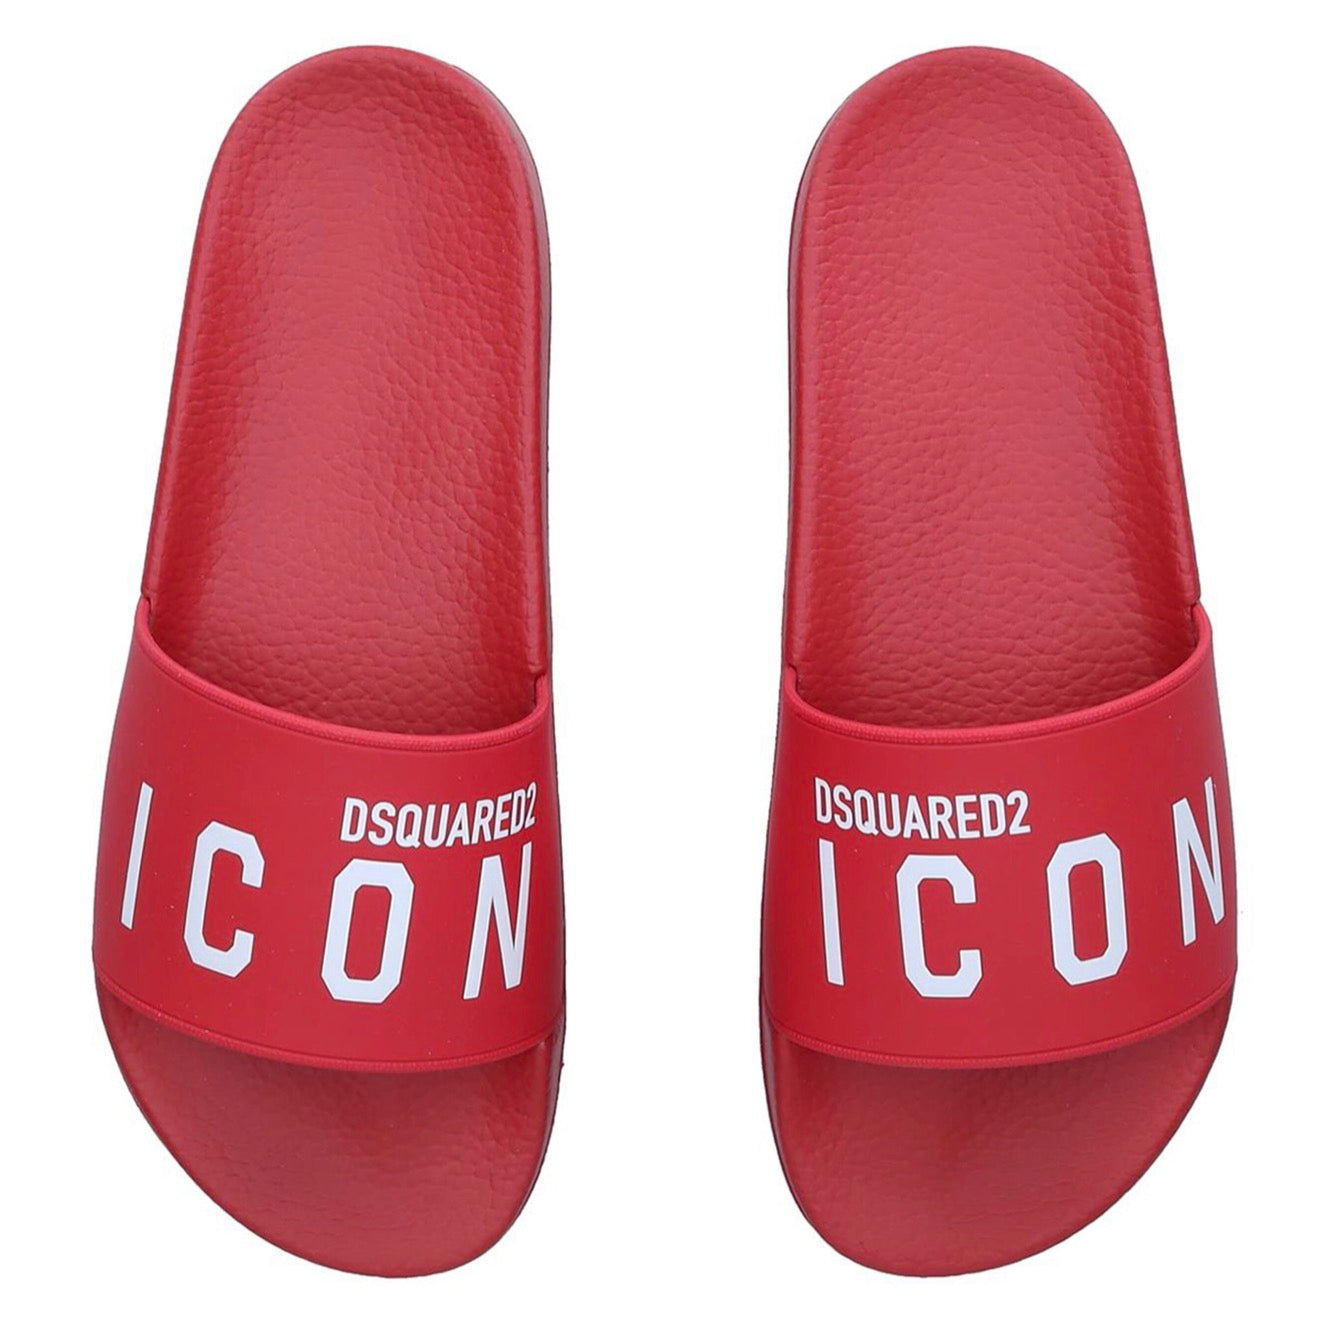 Rosso slides from Dsquared2. Sitting on a rosso rubber sole, they showcase a white graphic print with the brand's logo. 